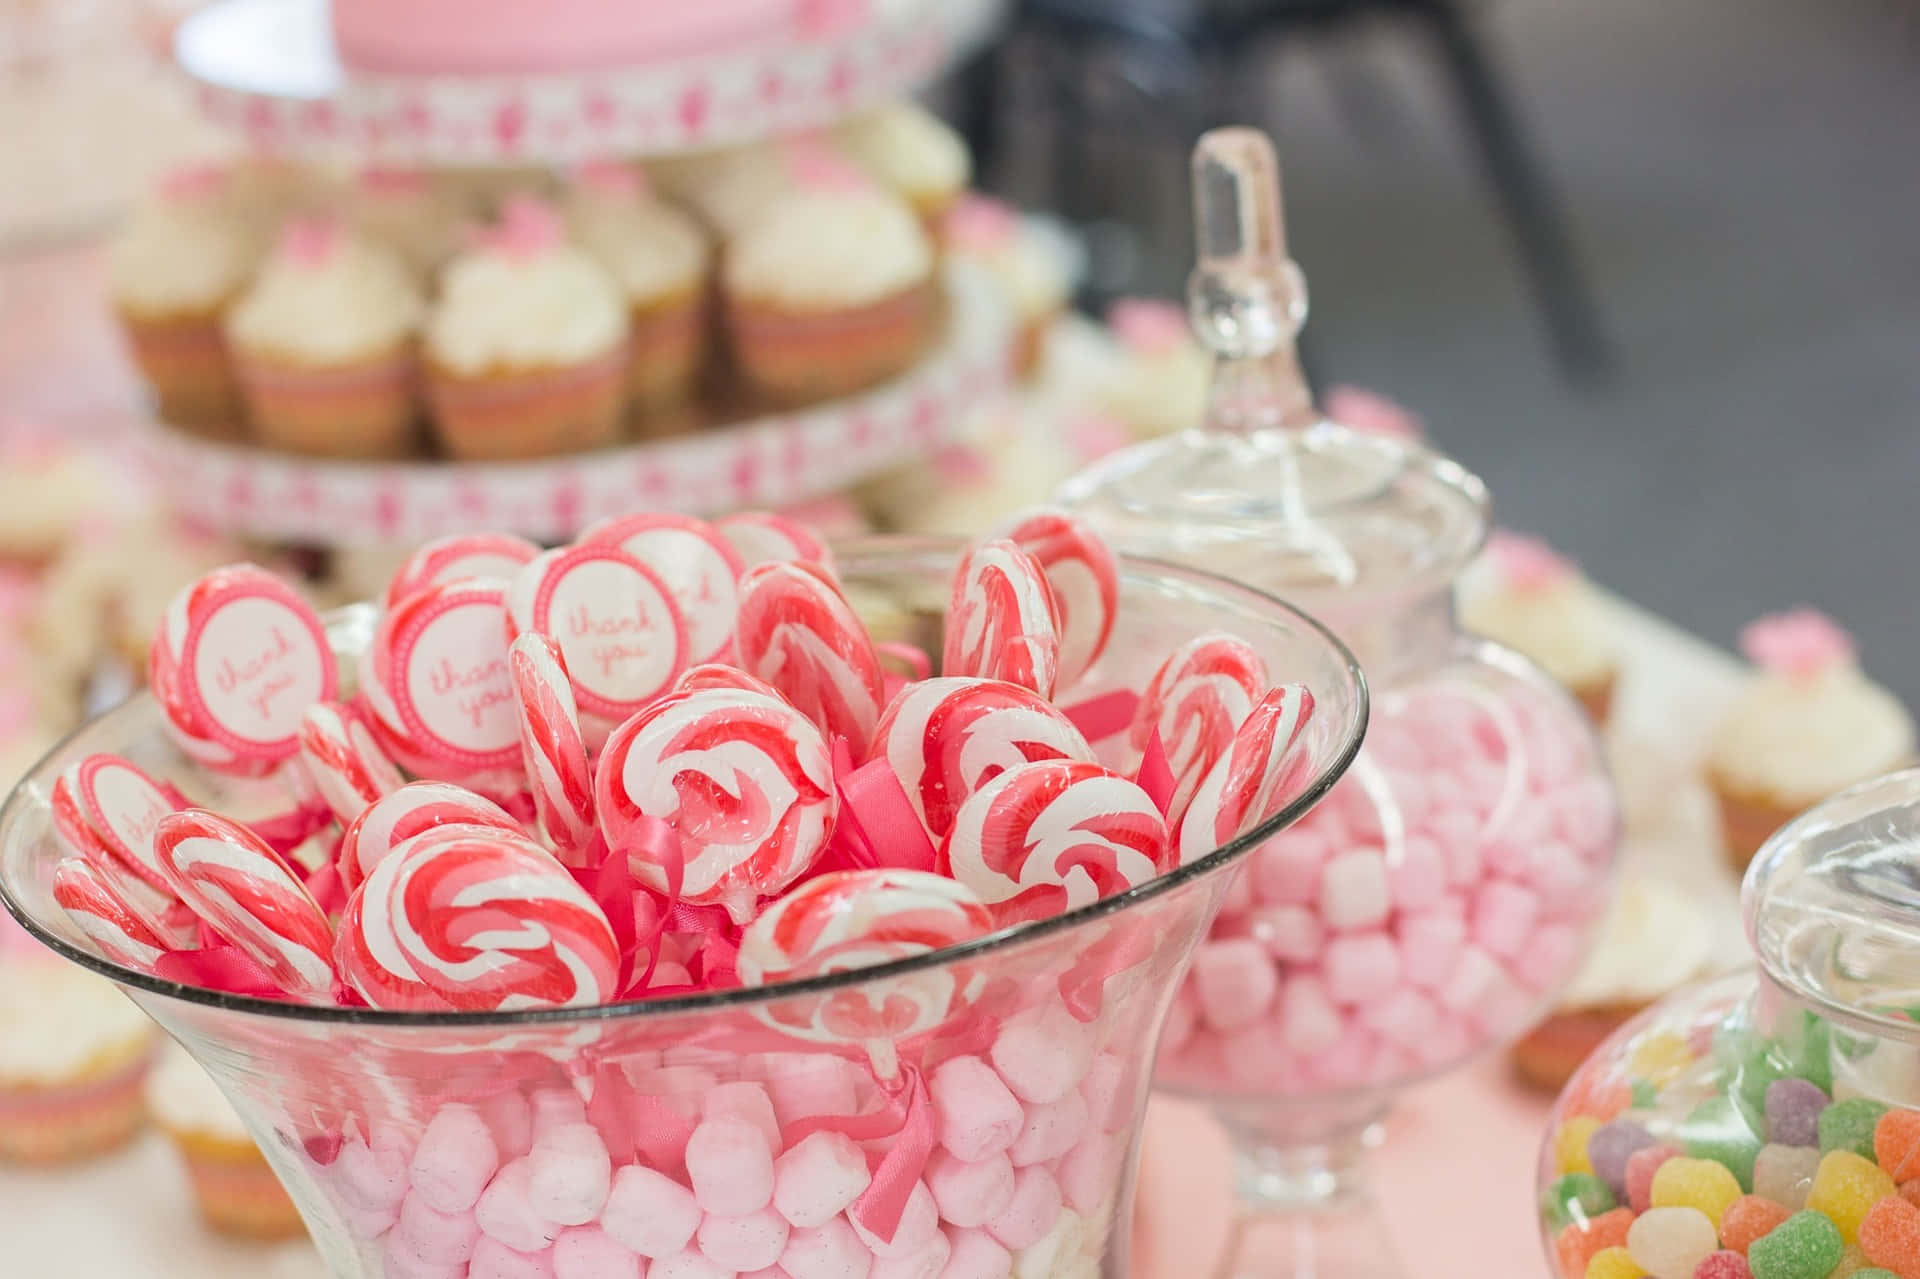 A Table With Candy And Cupcakes On It